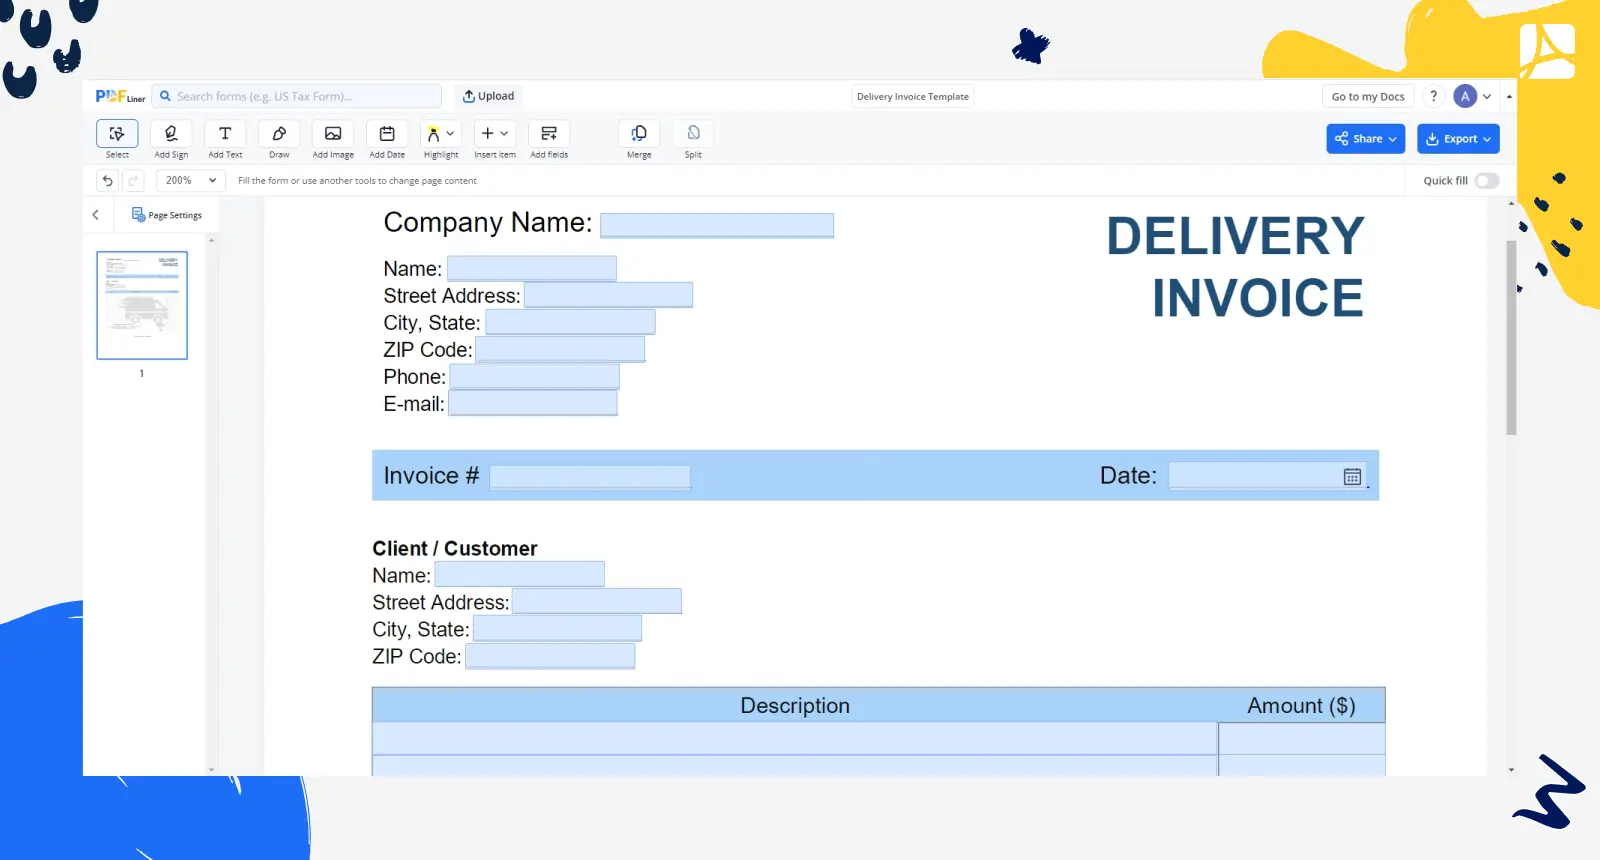 Delivery Invoice Template screenshot